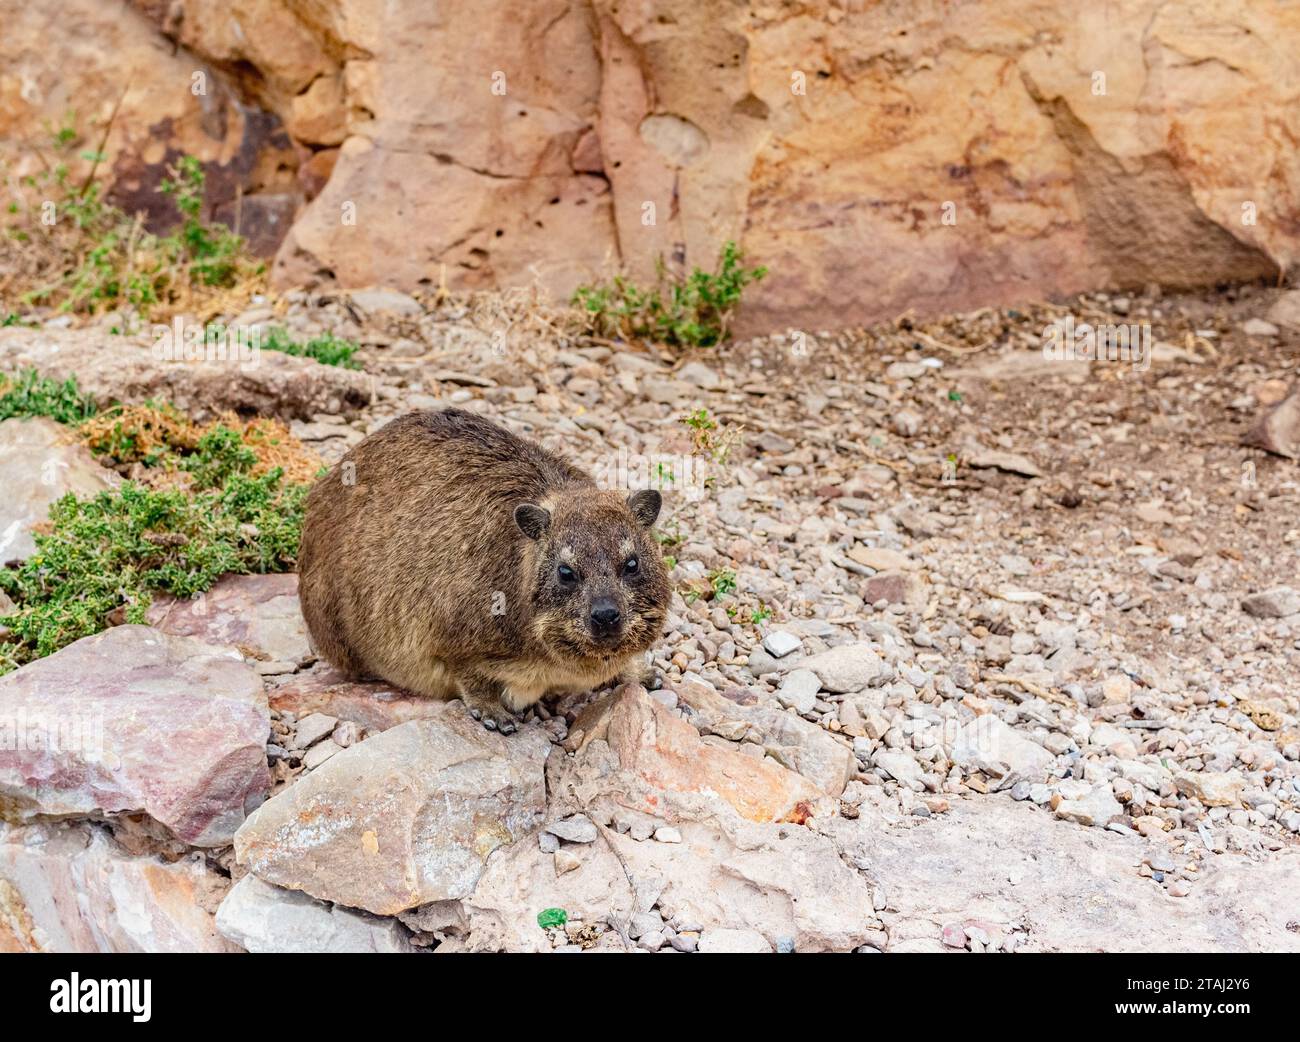 Rock hyrax, dassie, cape hyrax or rock rabbit (Procavia capensis). Saint Blaize hiking trail, Western Cape, South Africa. Selective focus Stock Photo